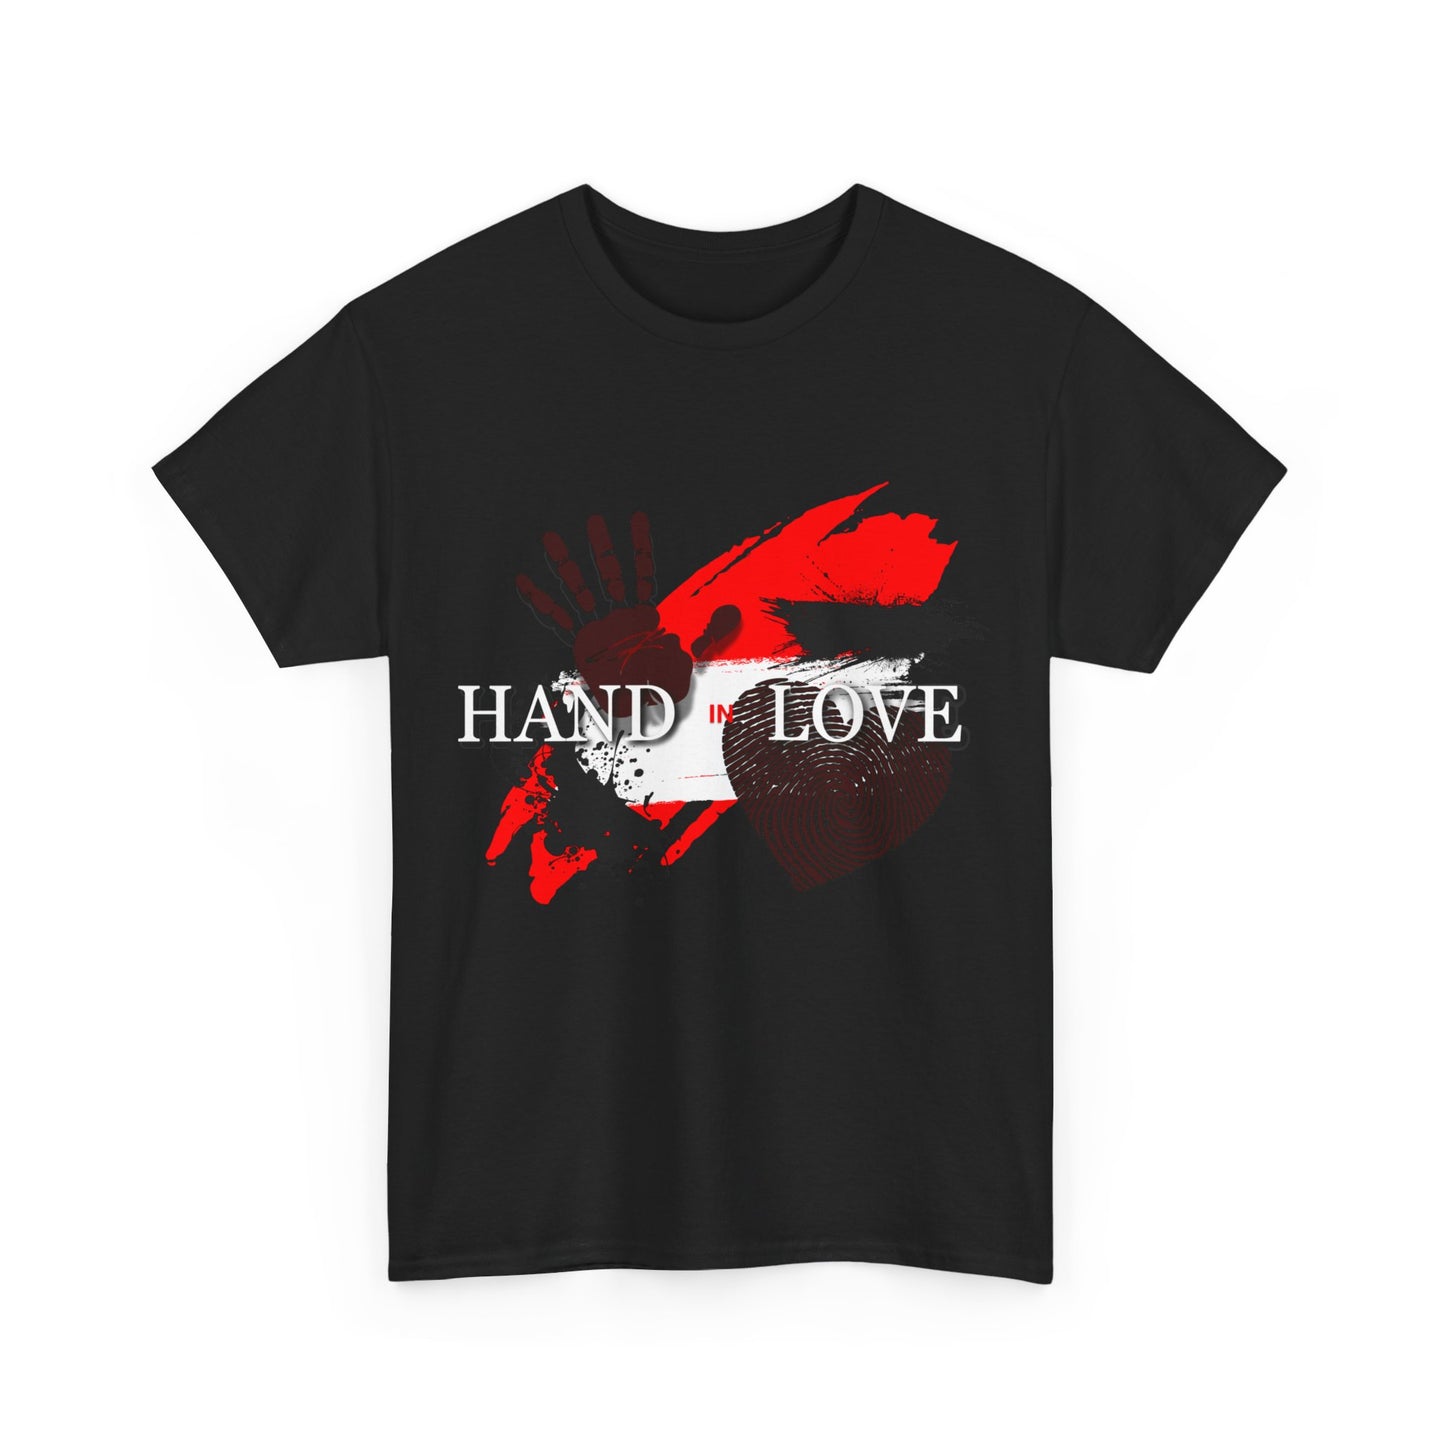 Heavy Cotton Tee with Powerful Ink Hand Print and Splattered Ink - "Hand in Love"